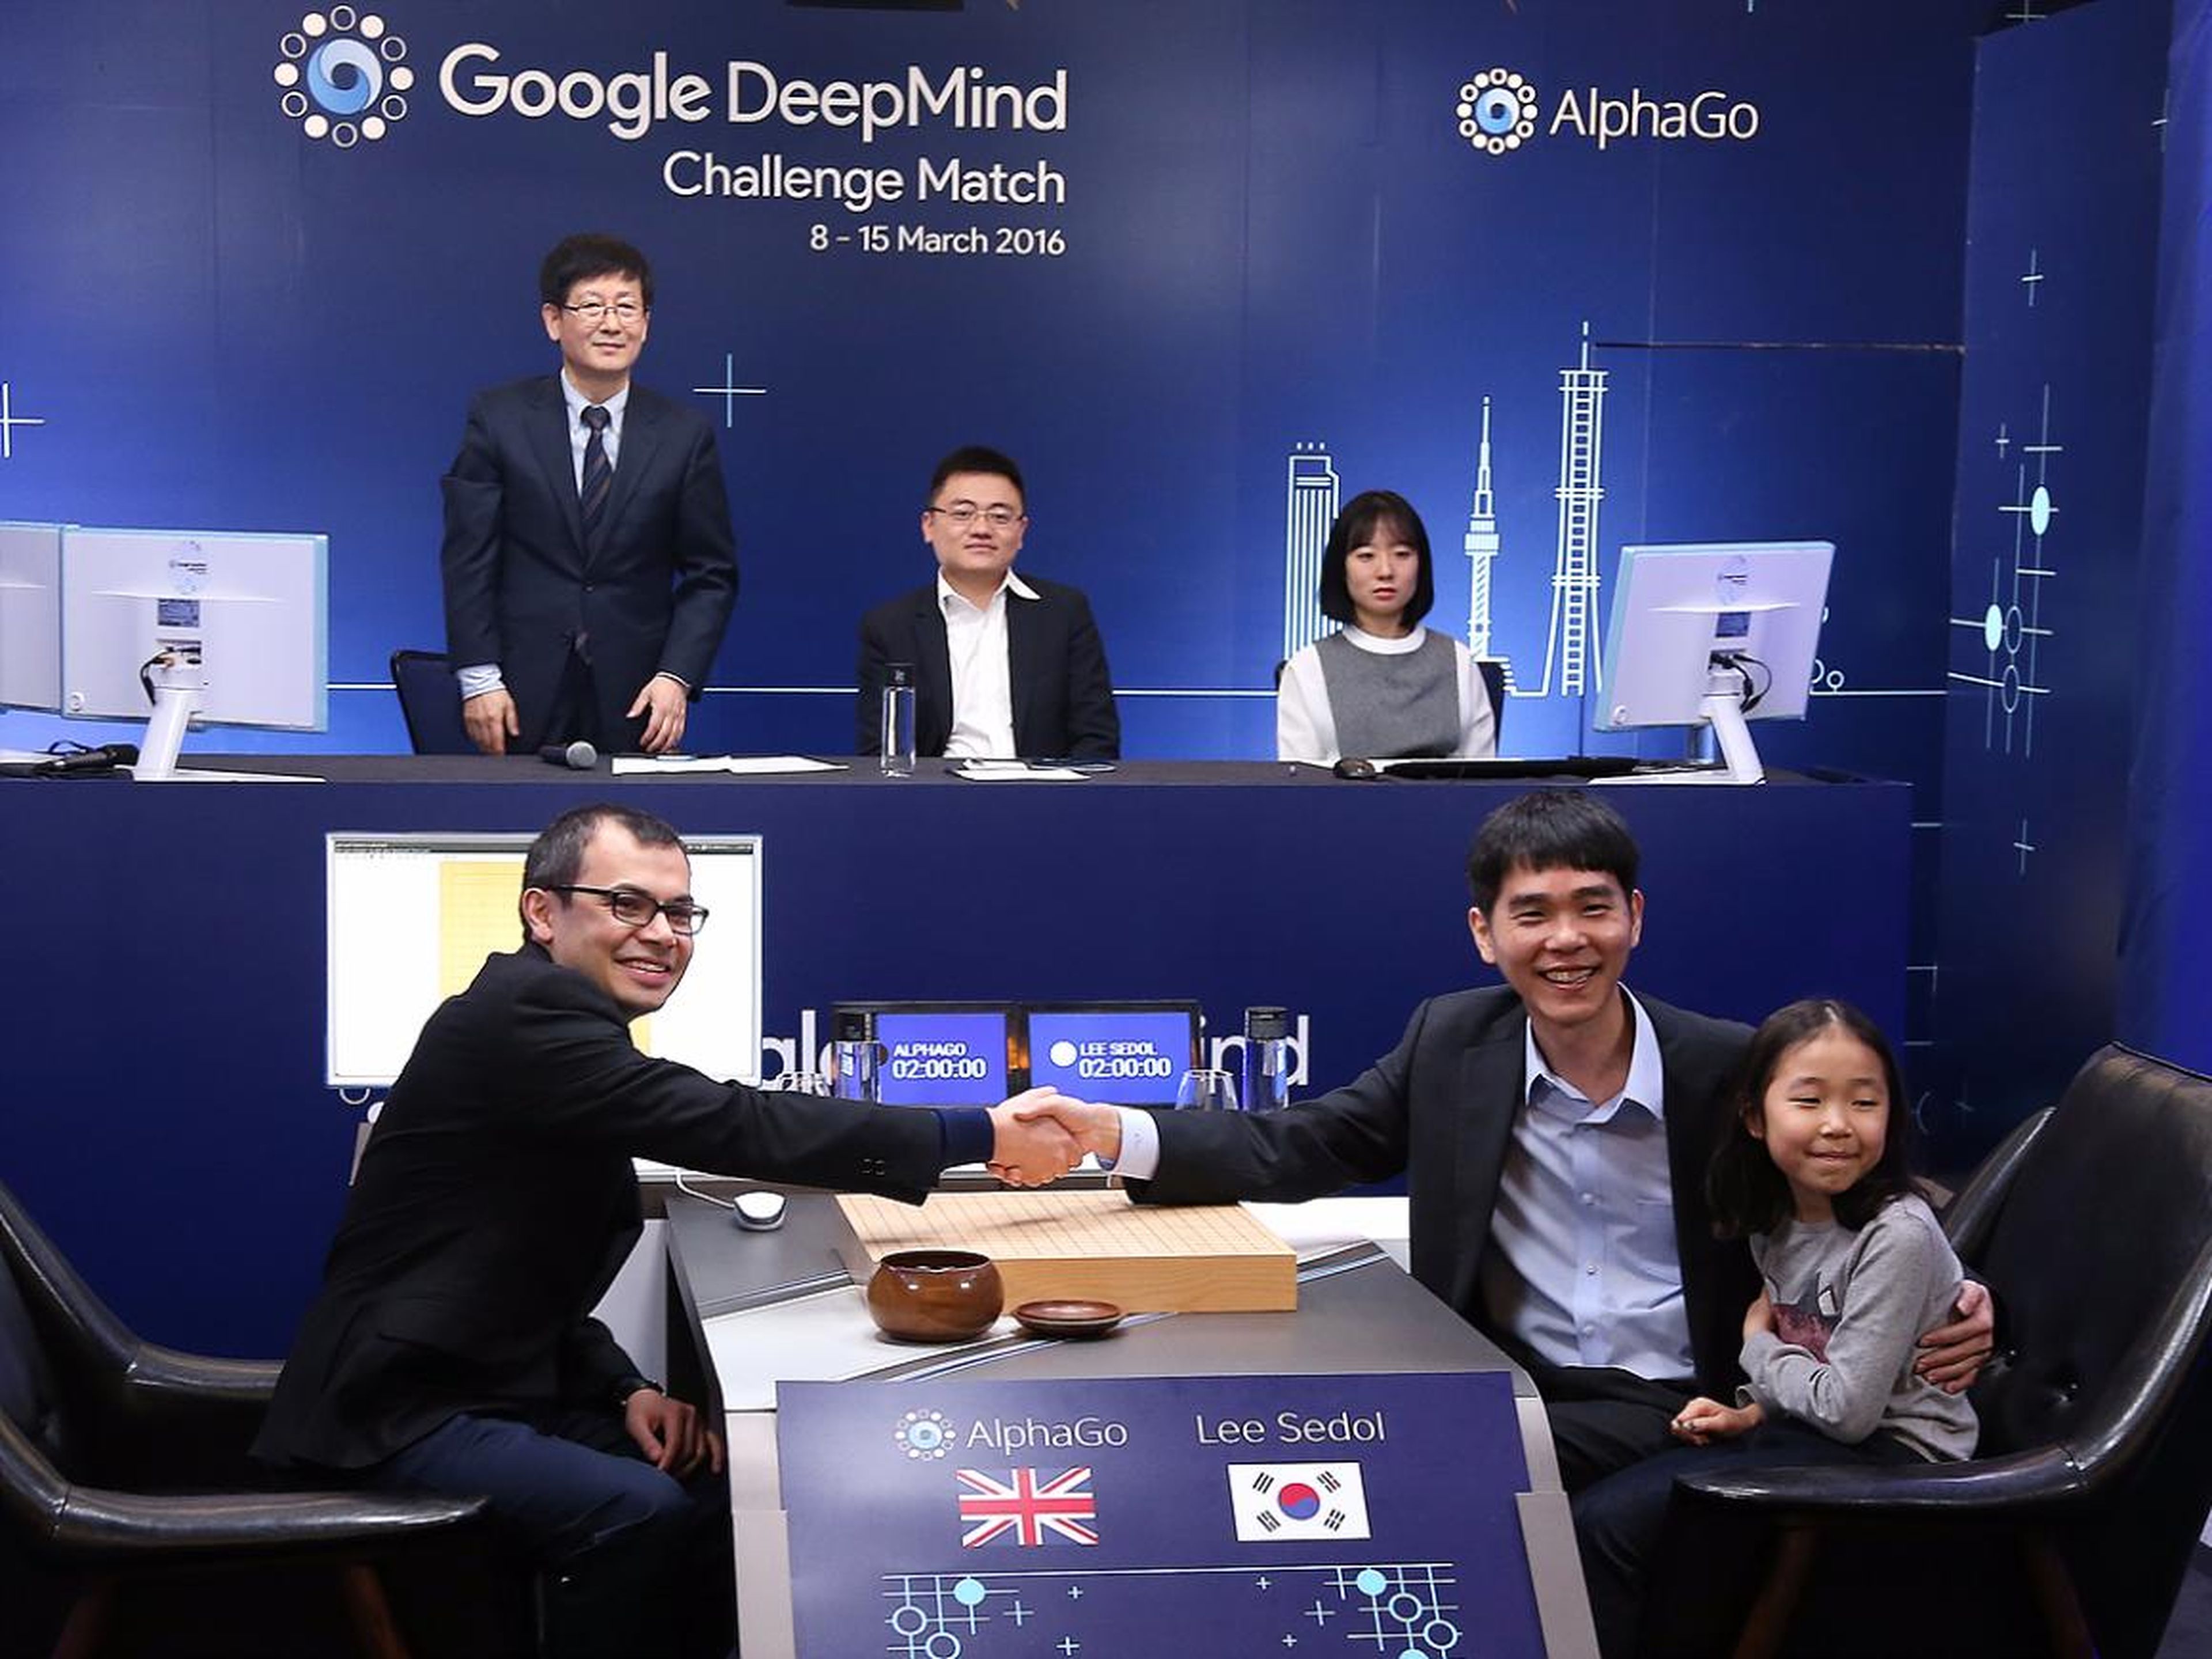 Google DeepMind focuses on artificial intelligence research. Acquired in 2014 for $500 million, DeepMind has focused on adding artificial intelligence throughout Google products, including search. The DeepMind AI can also teach